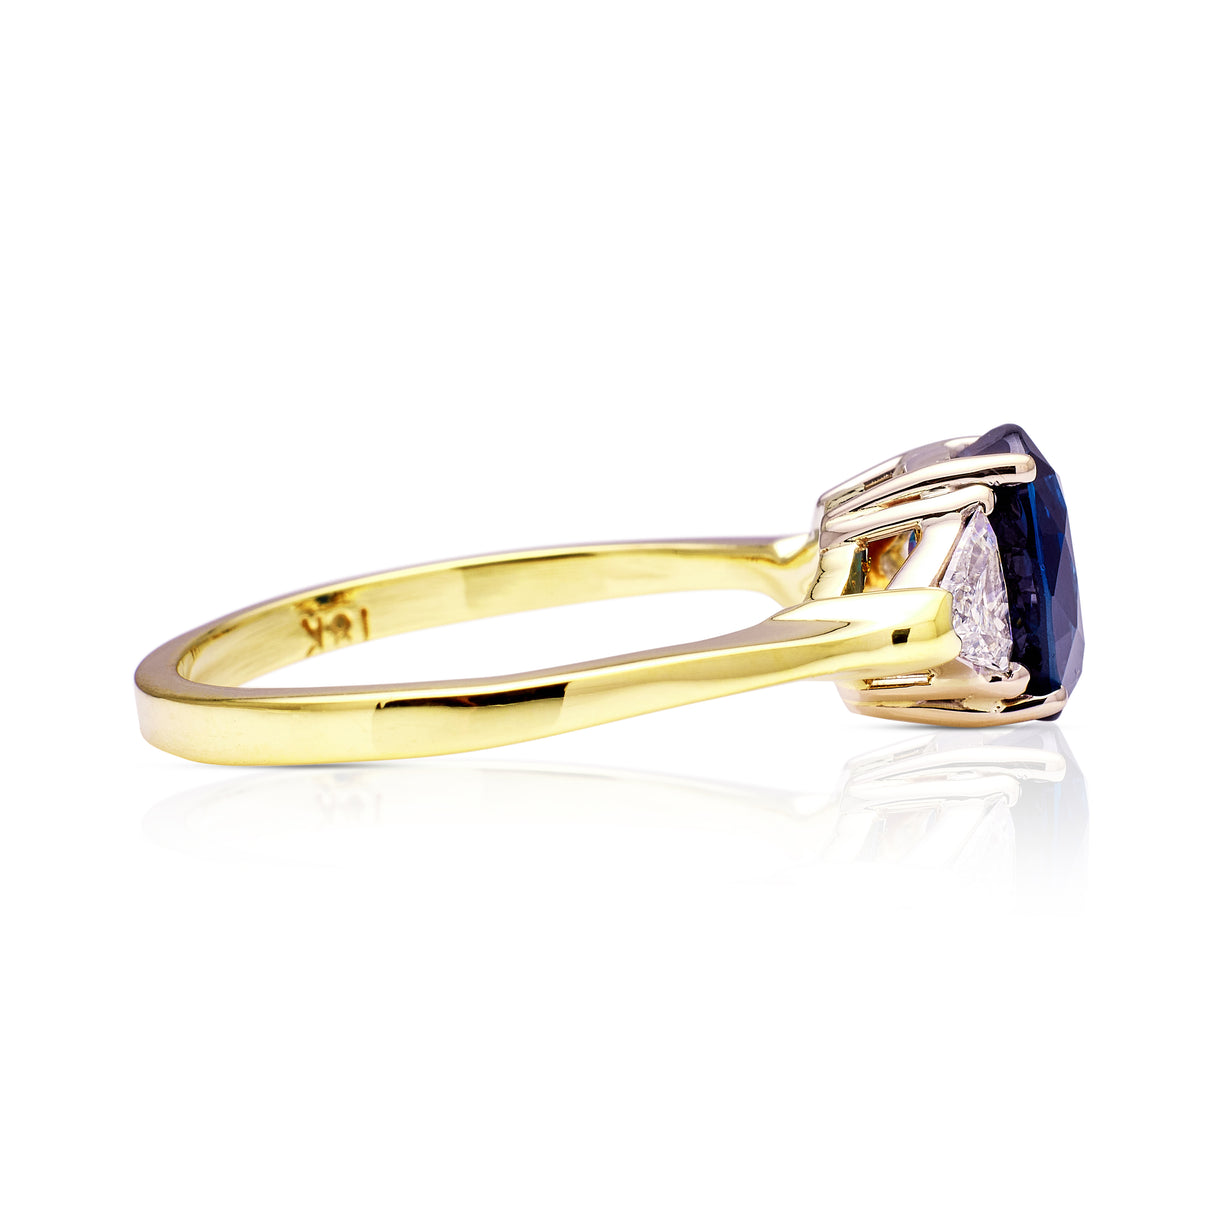 Vintage, Sapphire and Diamond Three-Stone Engagement Ring, 18ct Yellow and White Gold side view